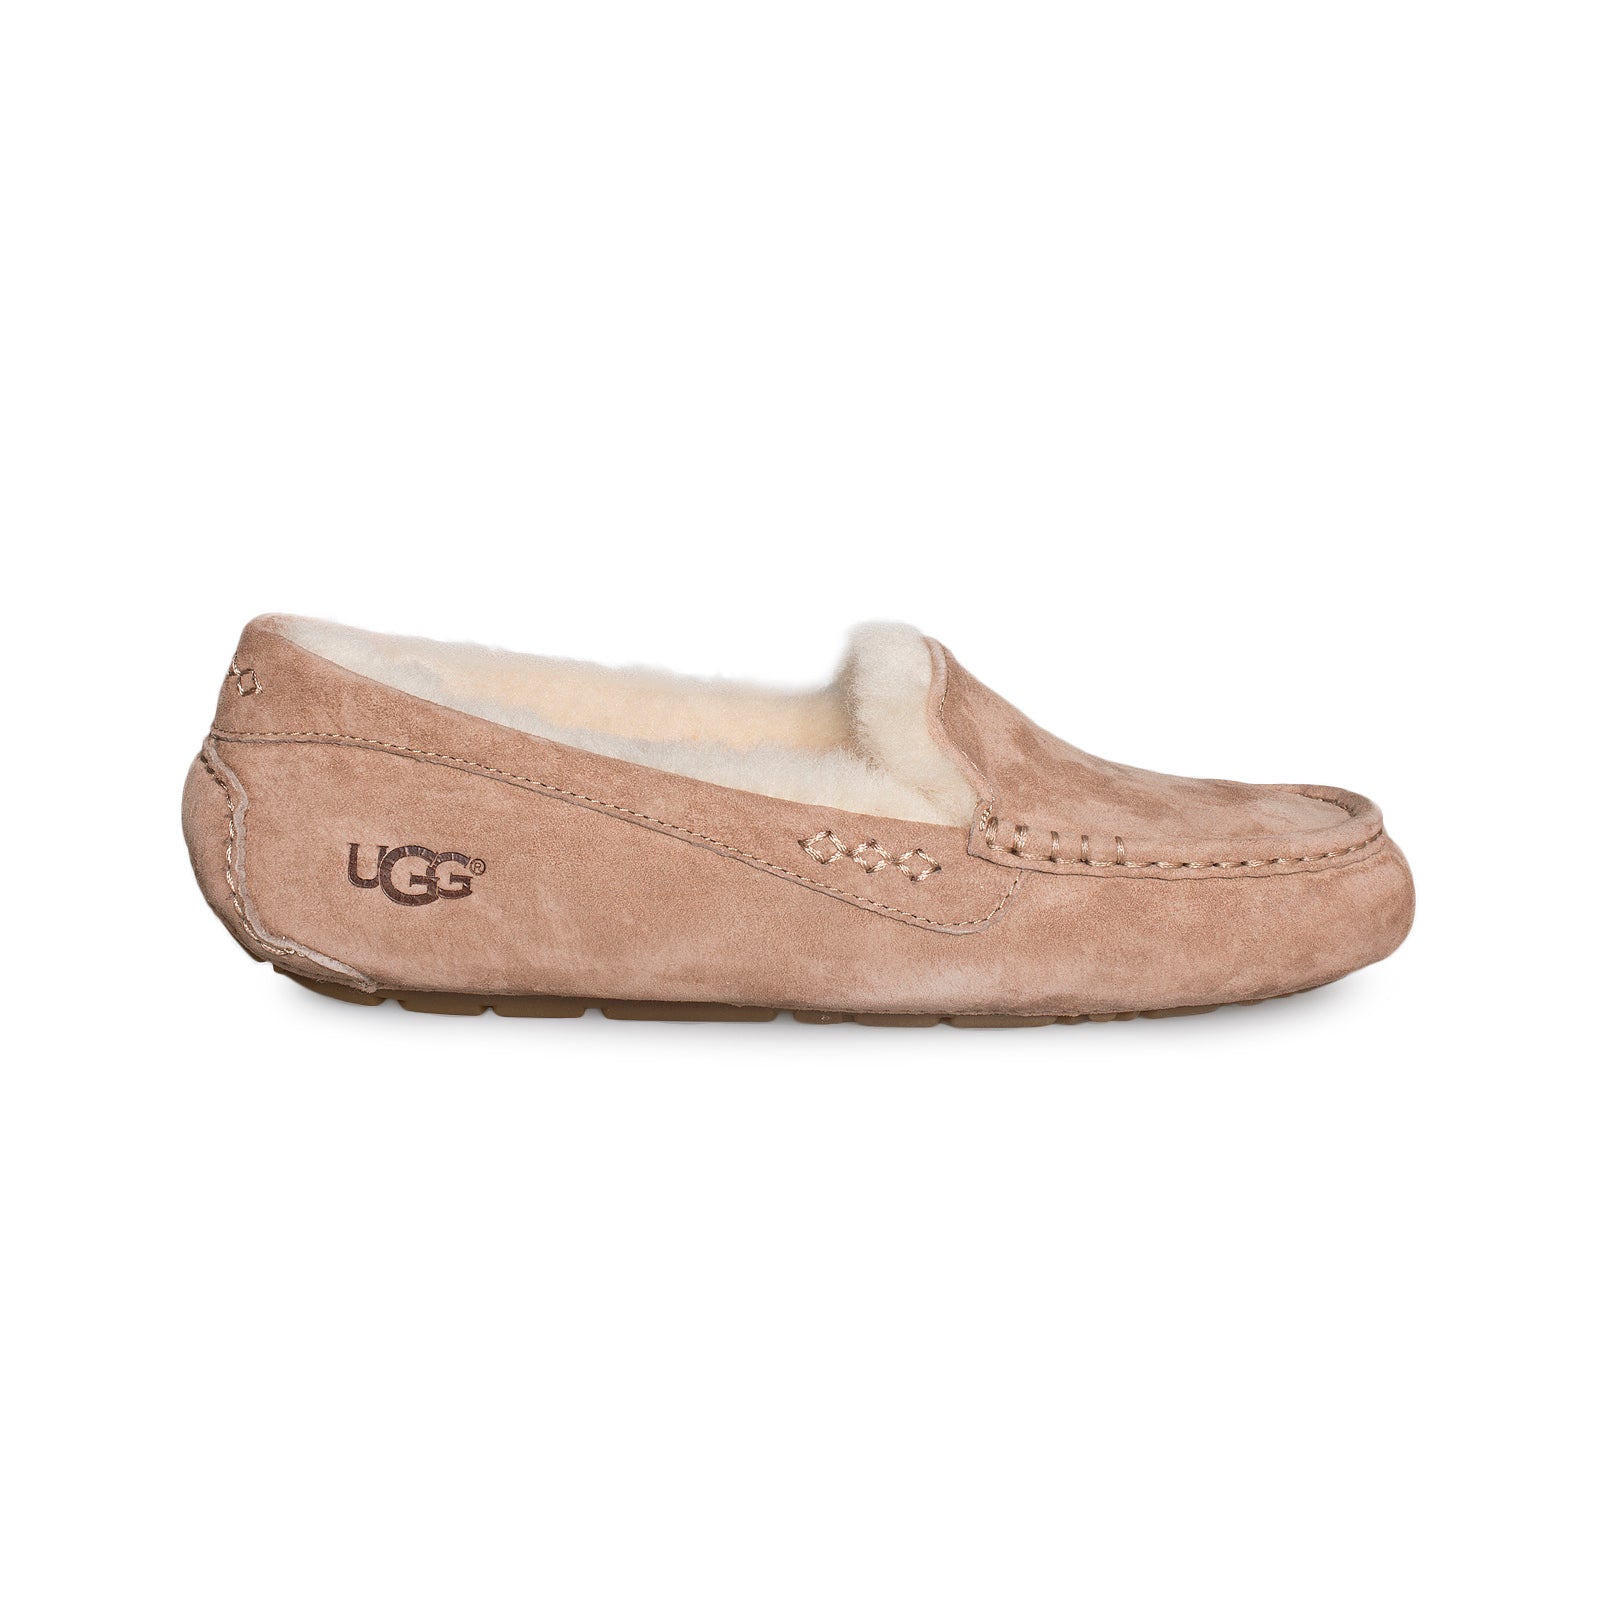 ugg ansley slippers fawn